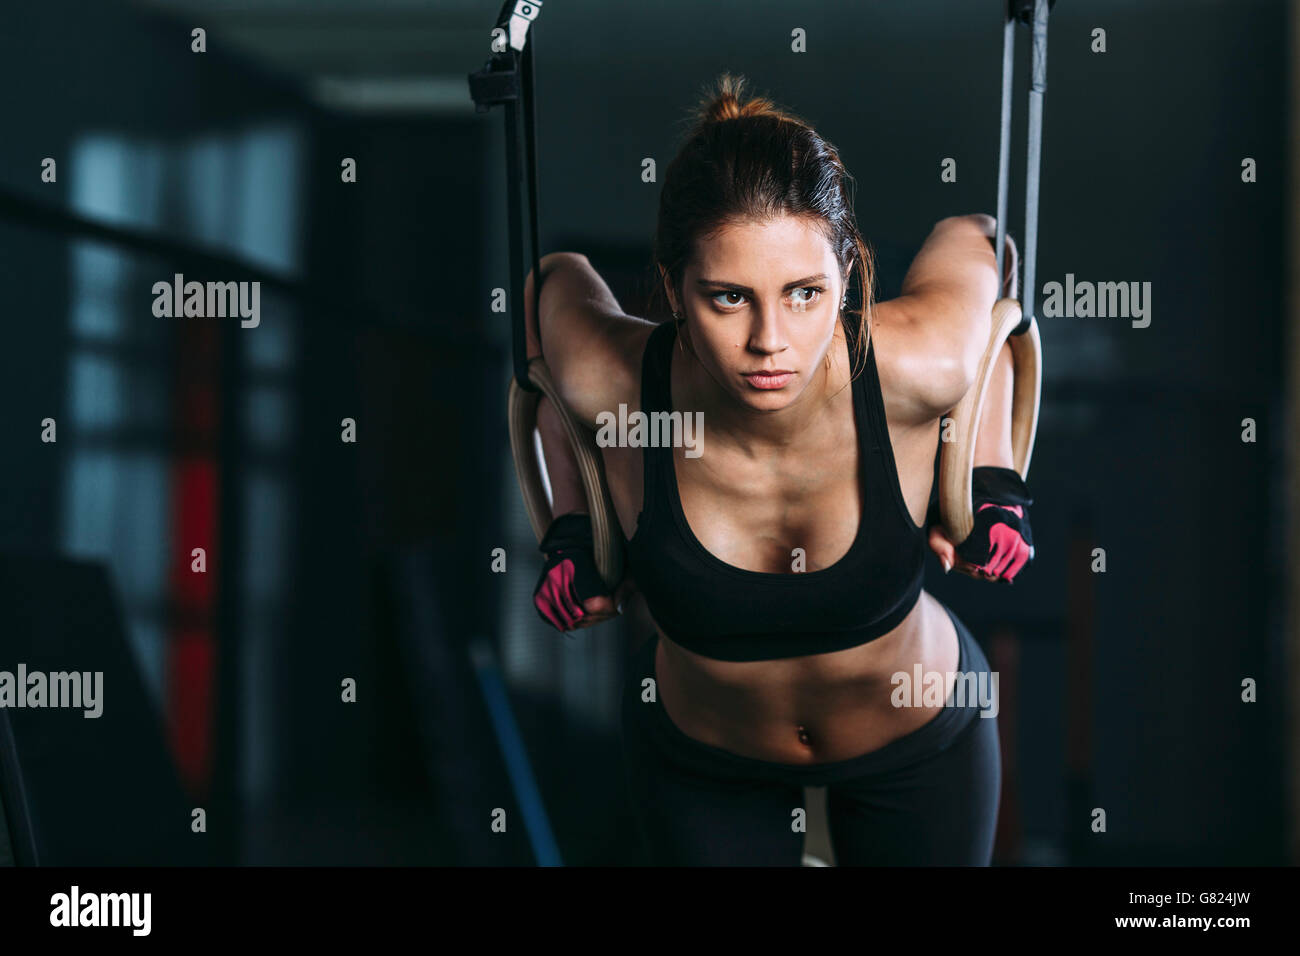 Front view of woman hanging on gymnastic rings at gym Stock Photo